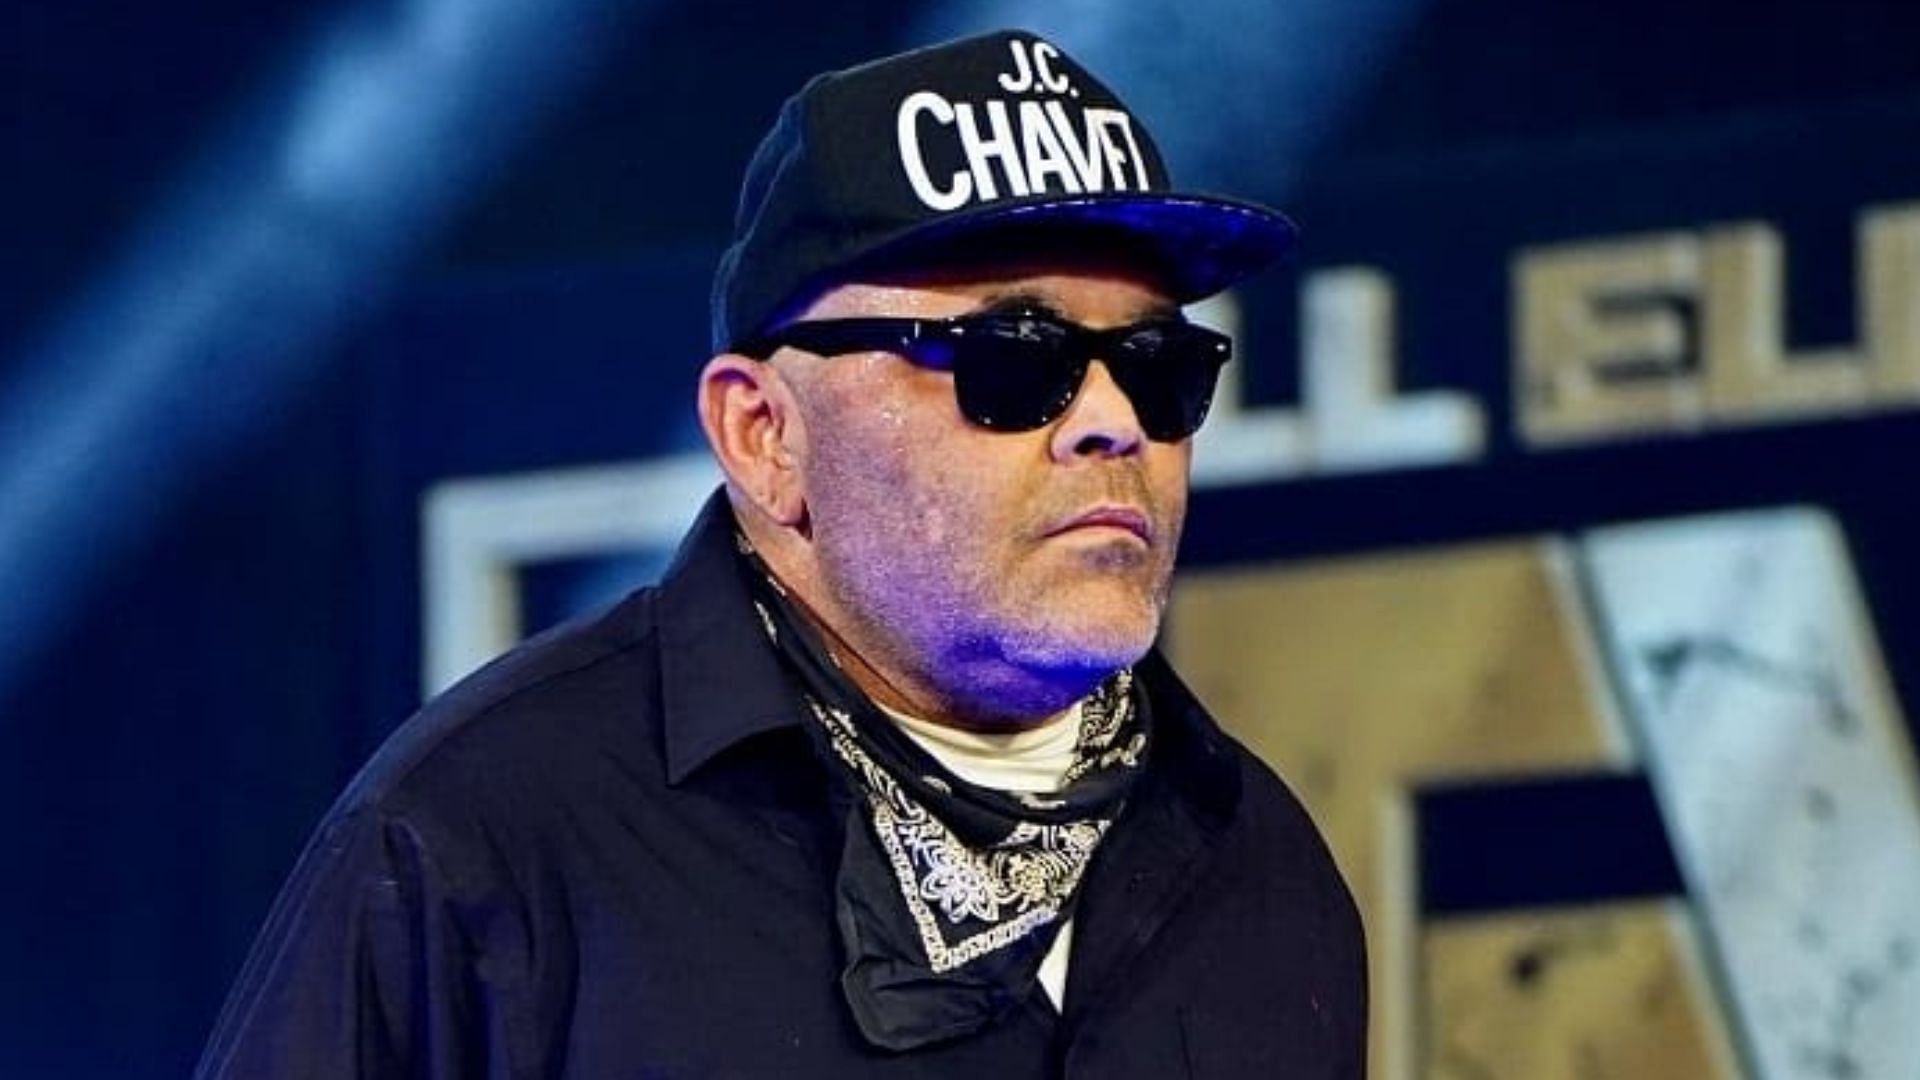 Konnan appearing at an AEW event in 2021